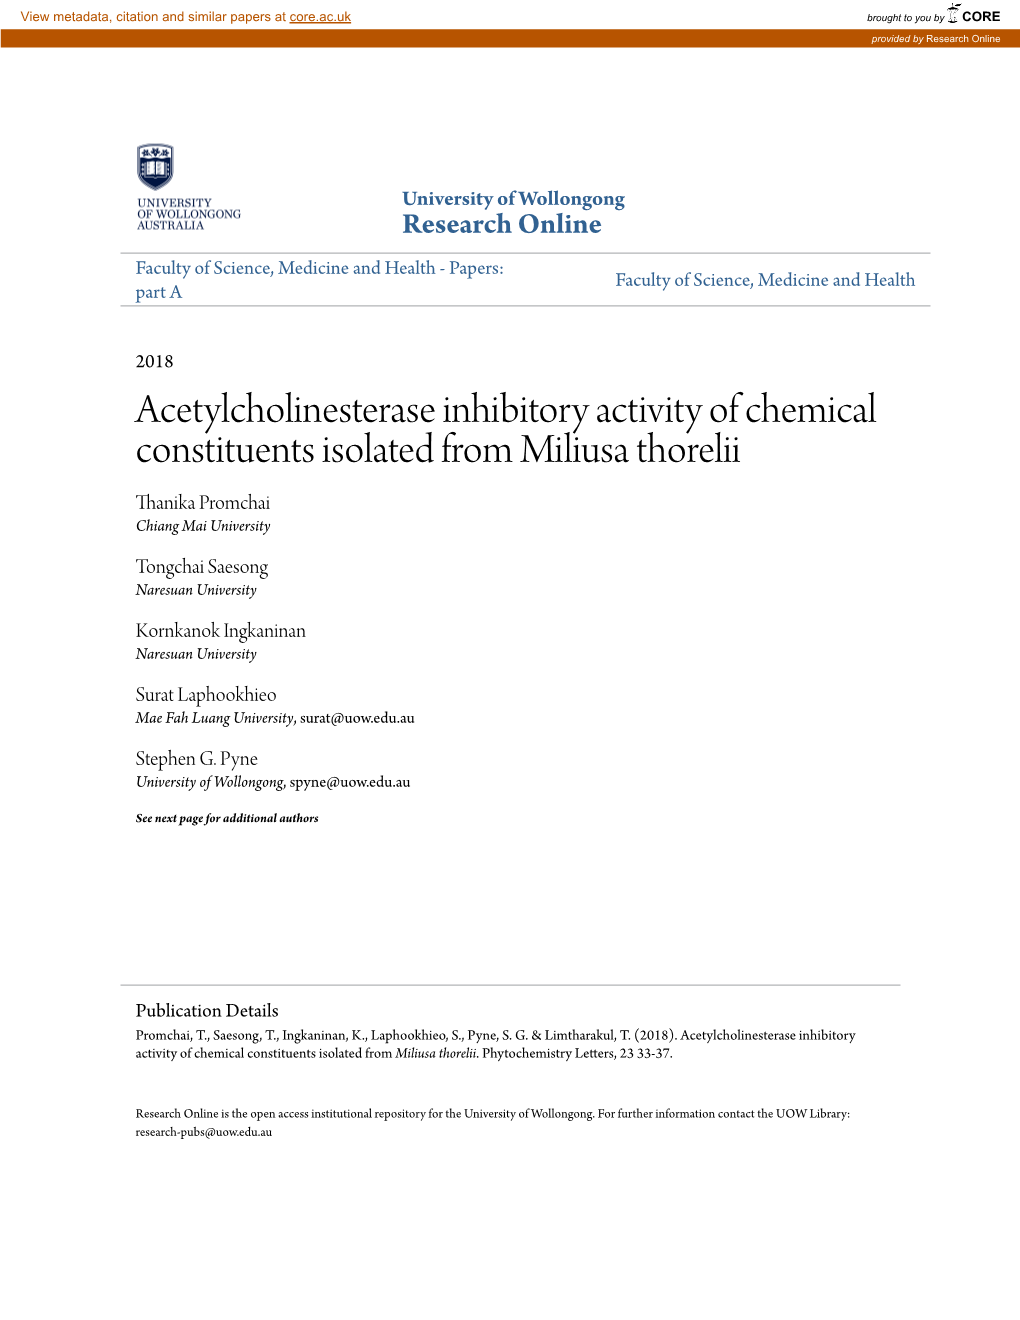 Acetylcholinesterase Inhibitory Activity of Chemical Constituents Isolated from Miliusa Thorelii Thanika Promchai Chiang Mai University